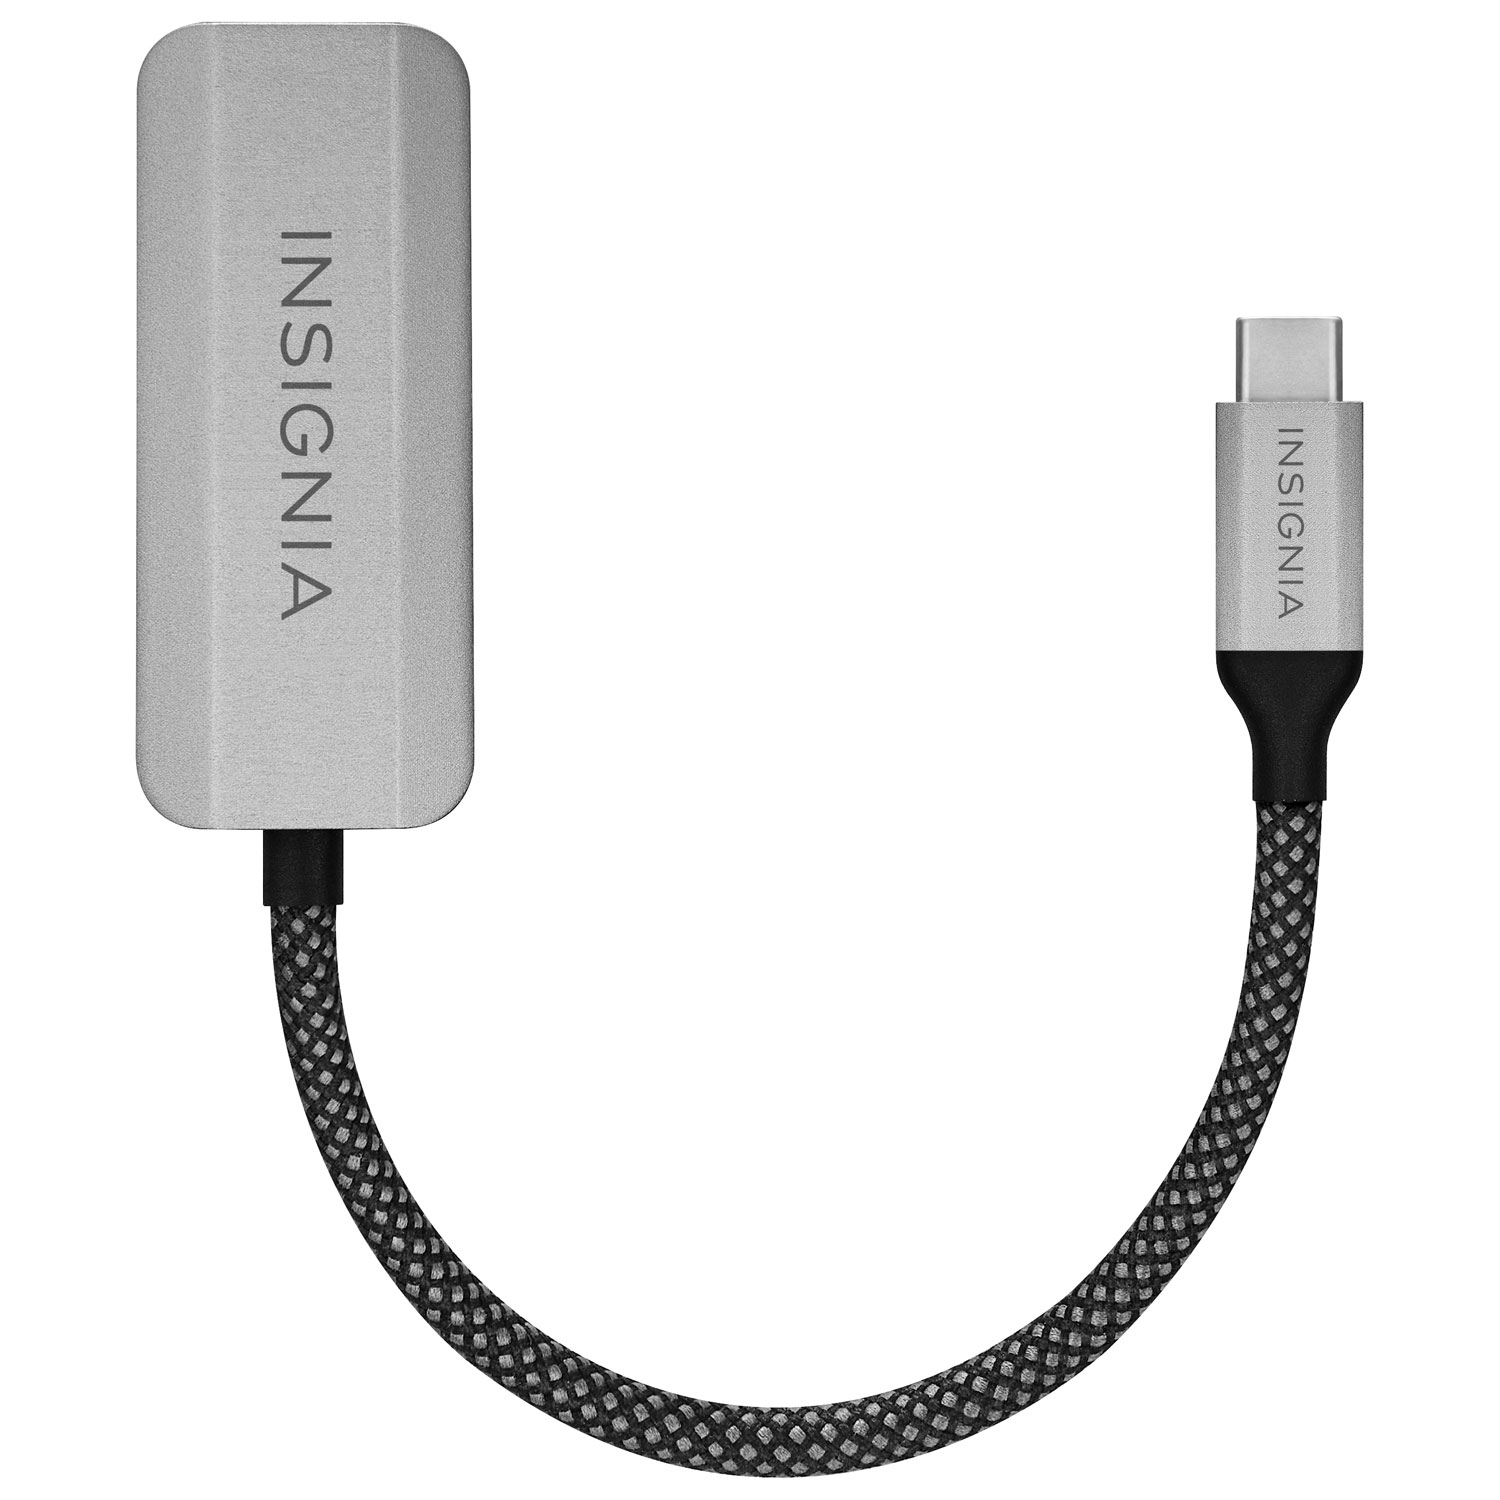 Insignia™ USB-C to Ethernet Adapter Black NS-PA3CELB23 - Best Buy